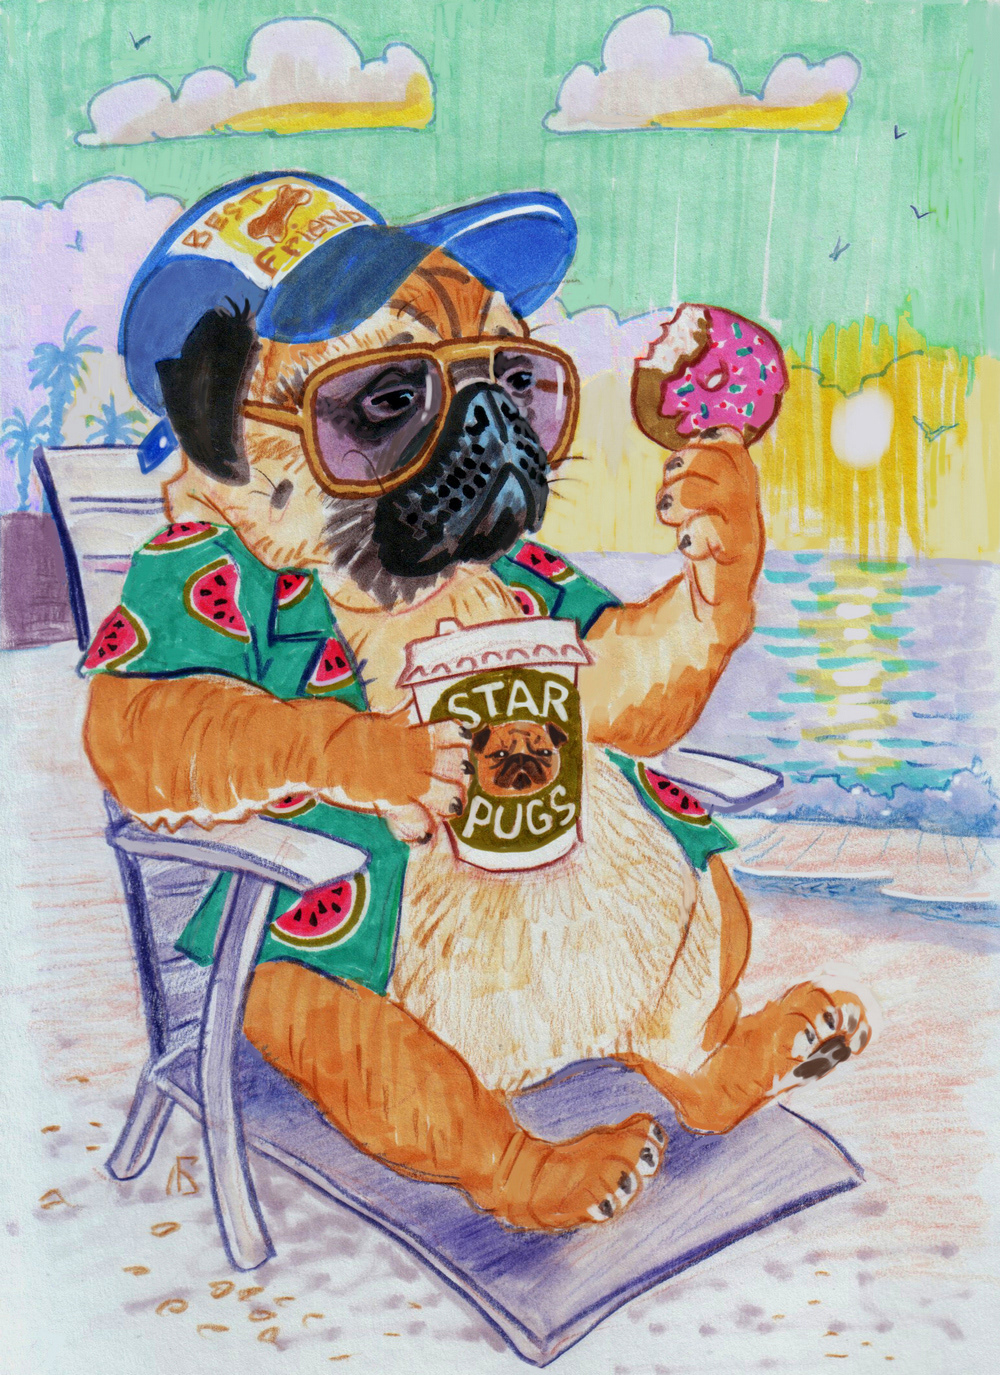 Pugs and relax